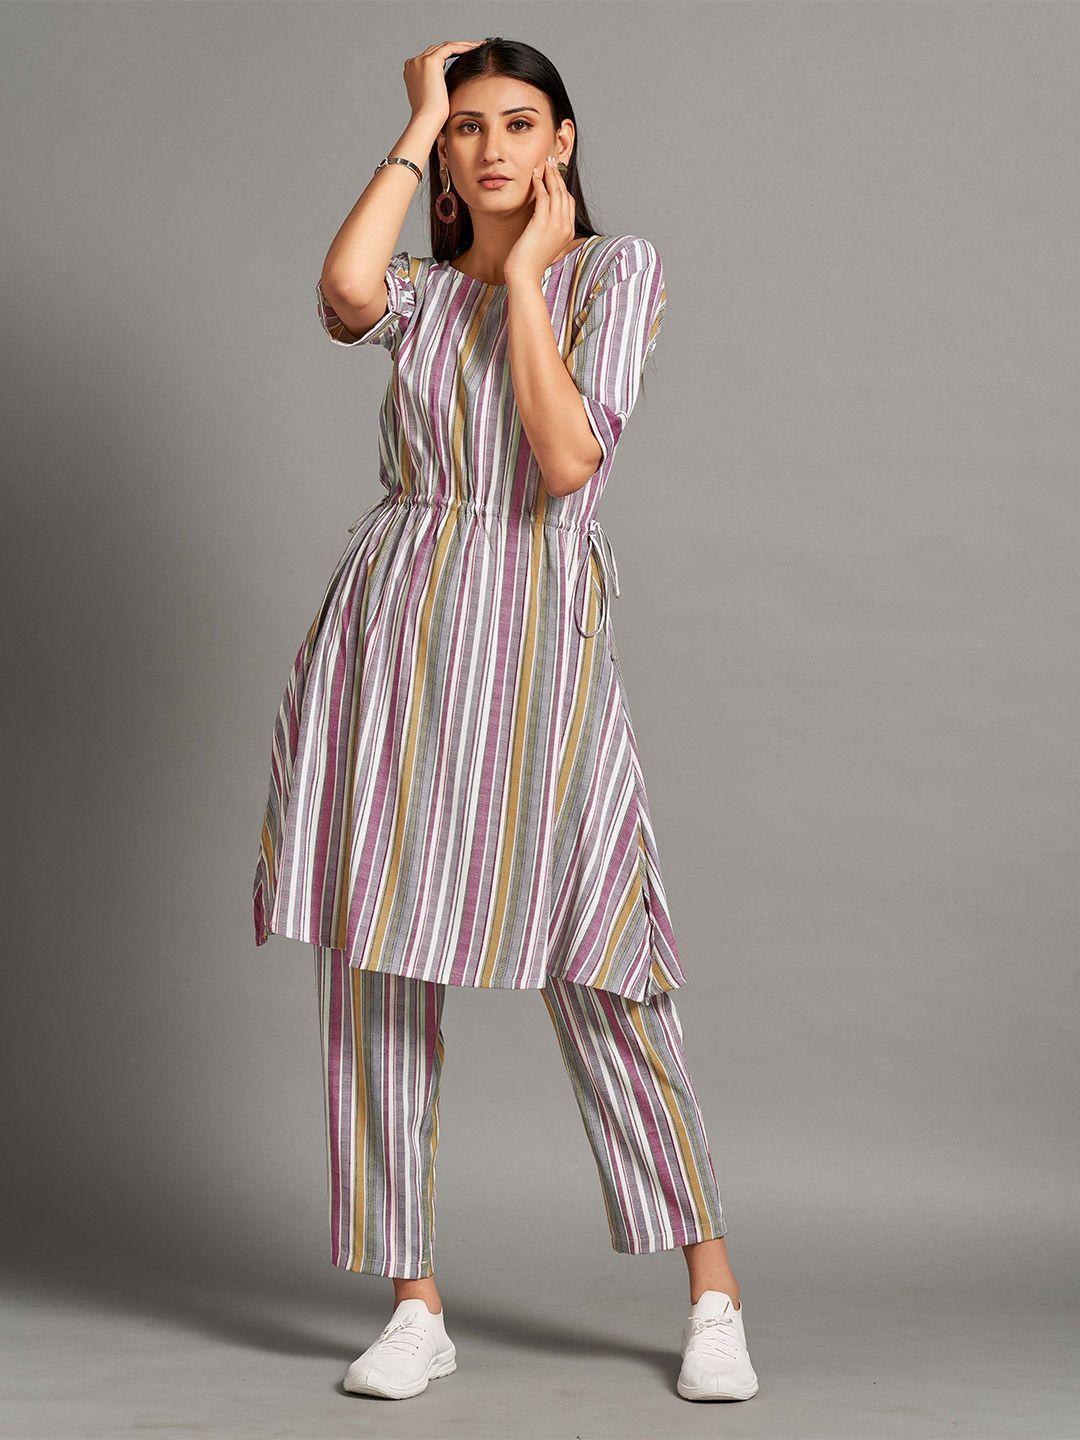 house of mira striped tunic & trouser co-ord set